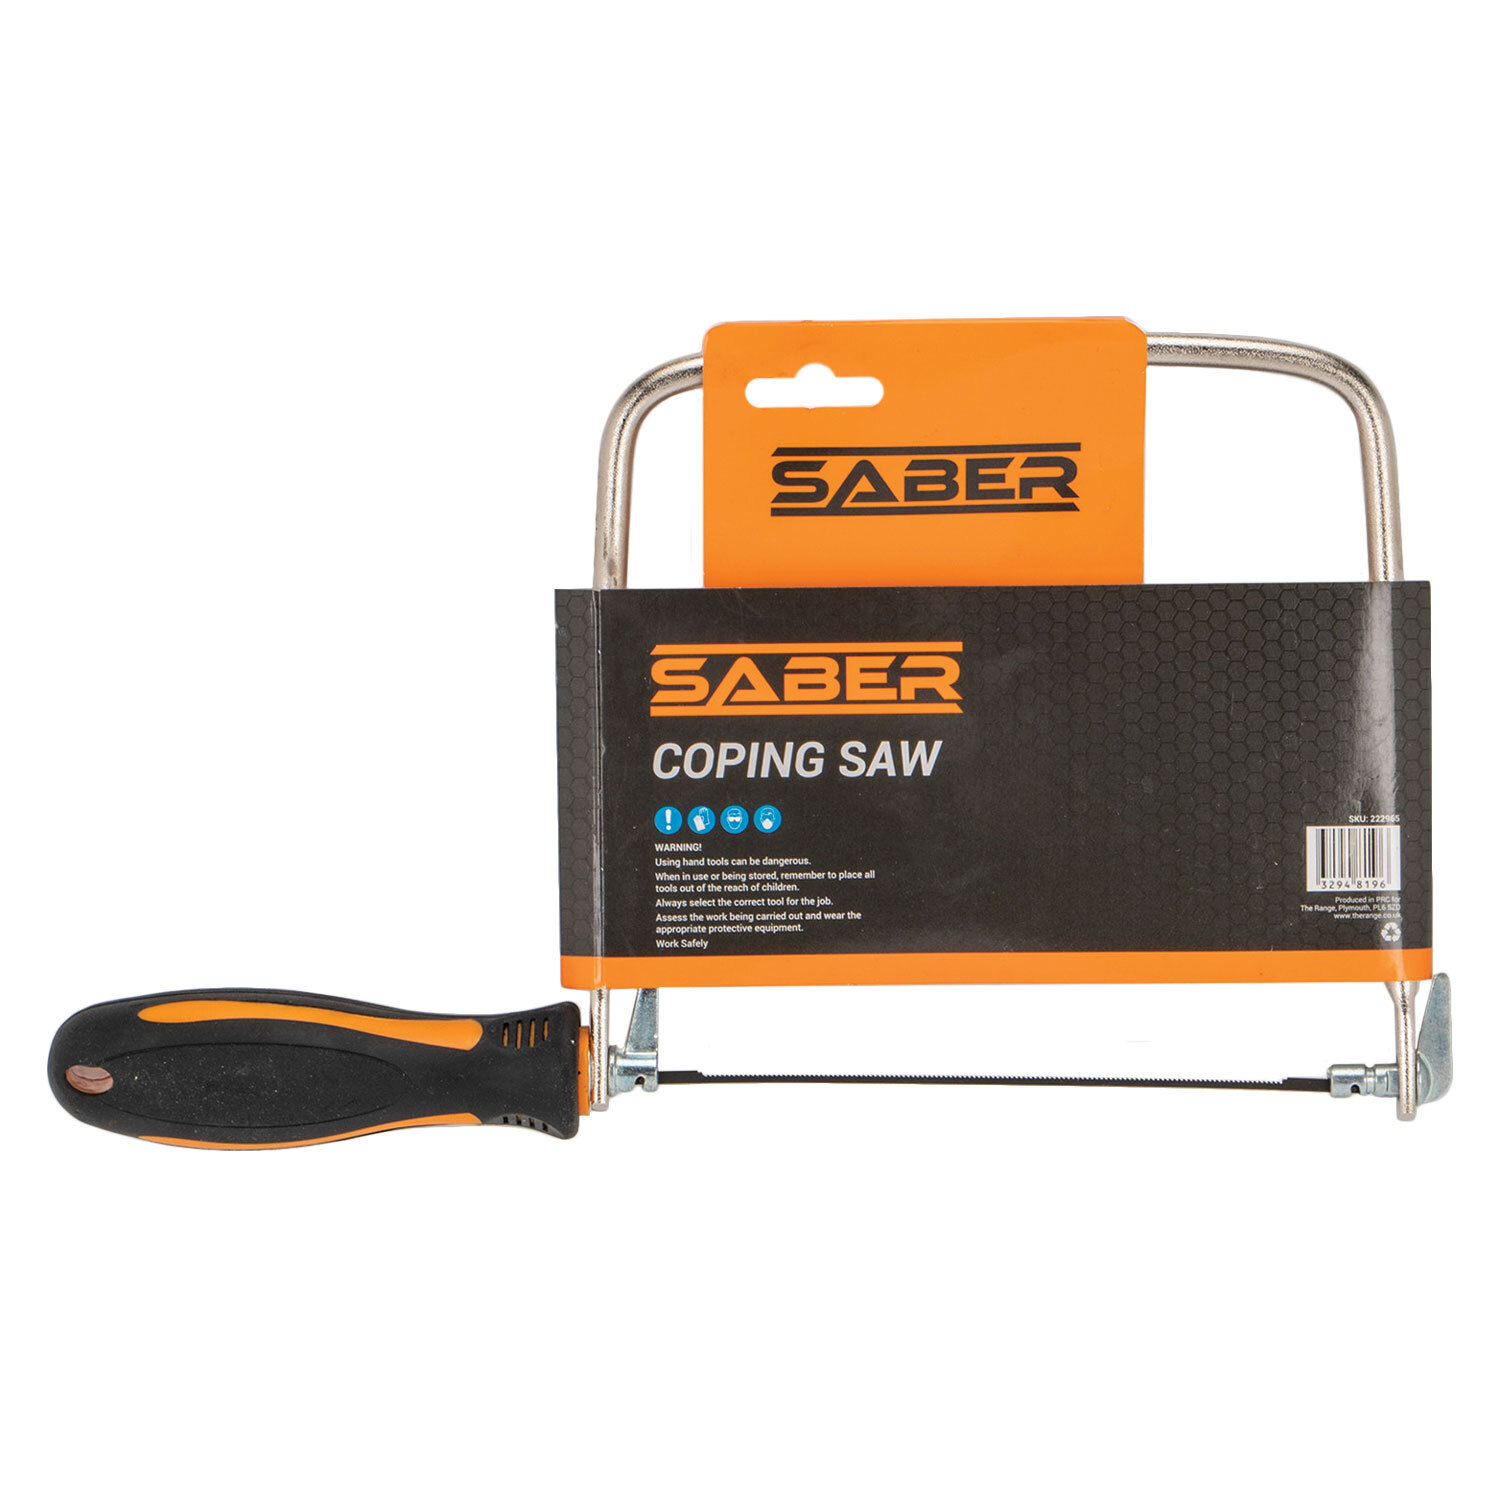 Saber Coping Saw with Blades Image